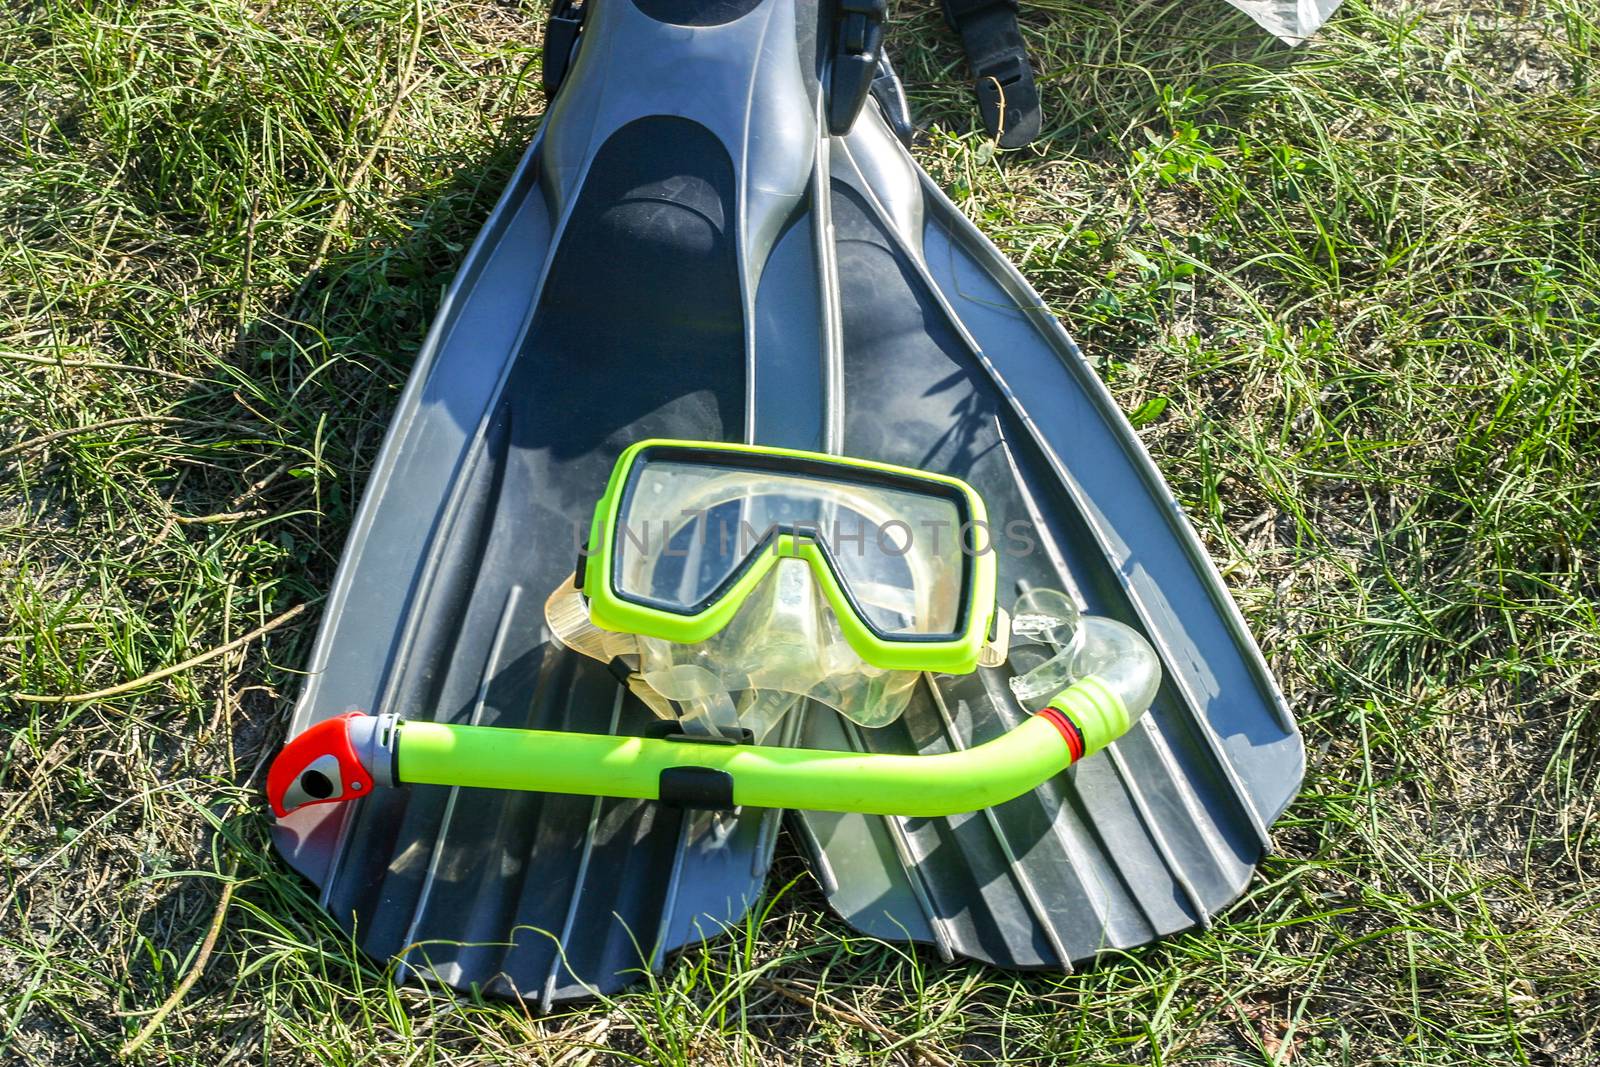 underwater mask, snorkel, and flippers lying on the grass. diver equipment